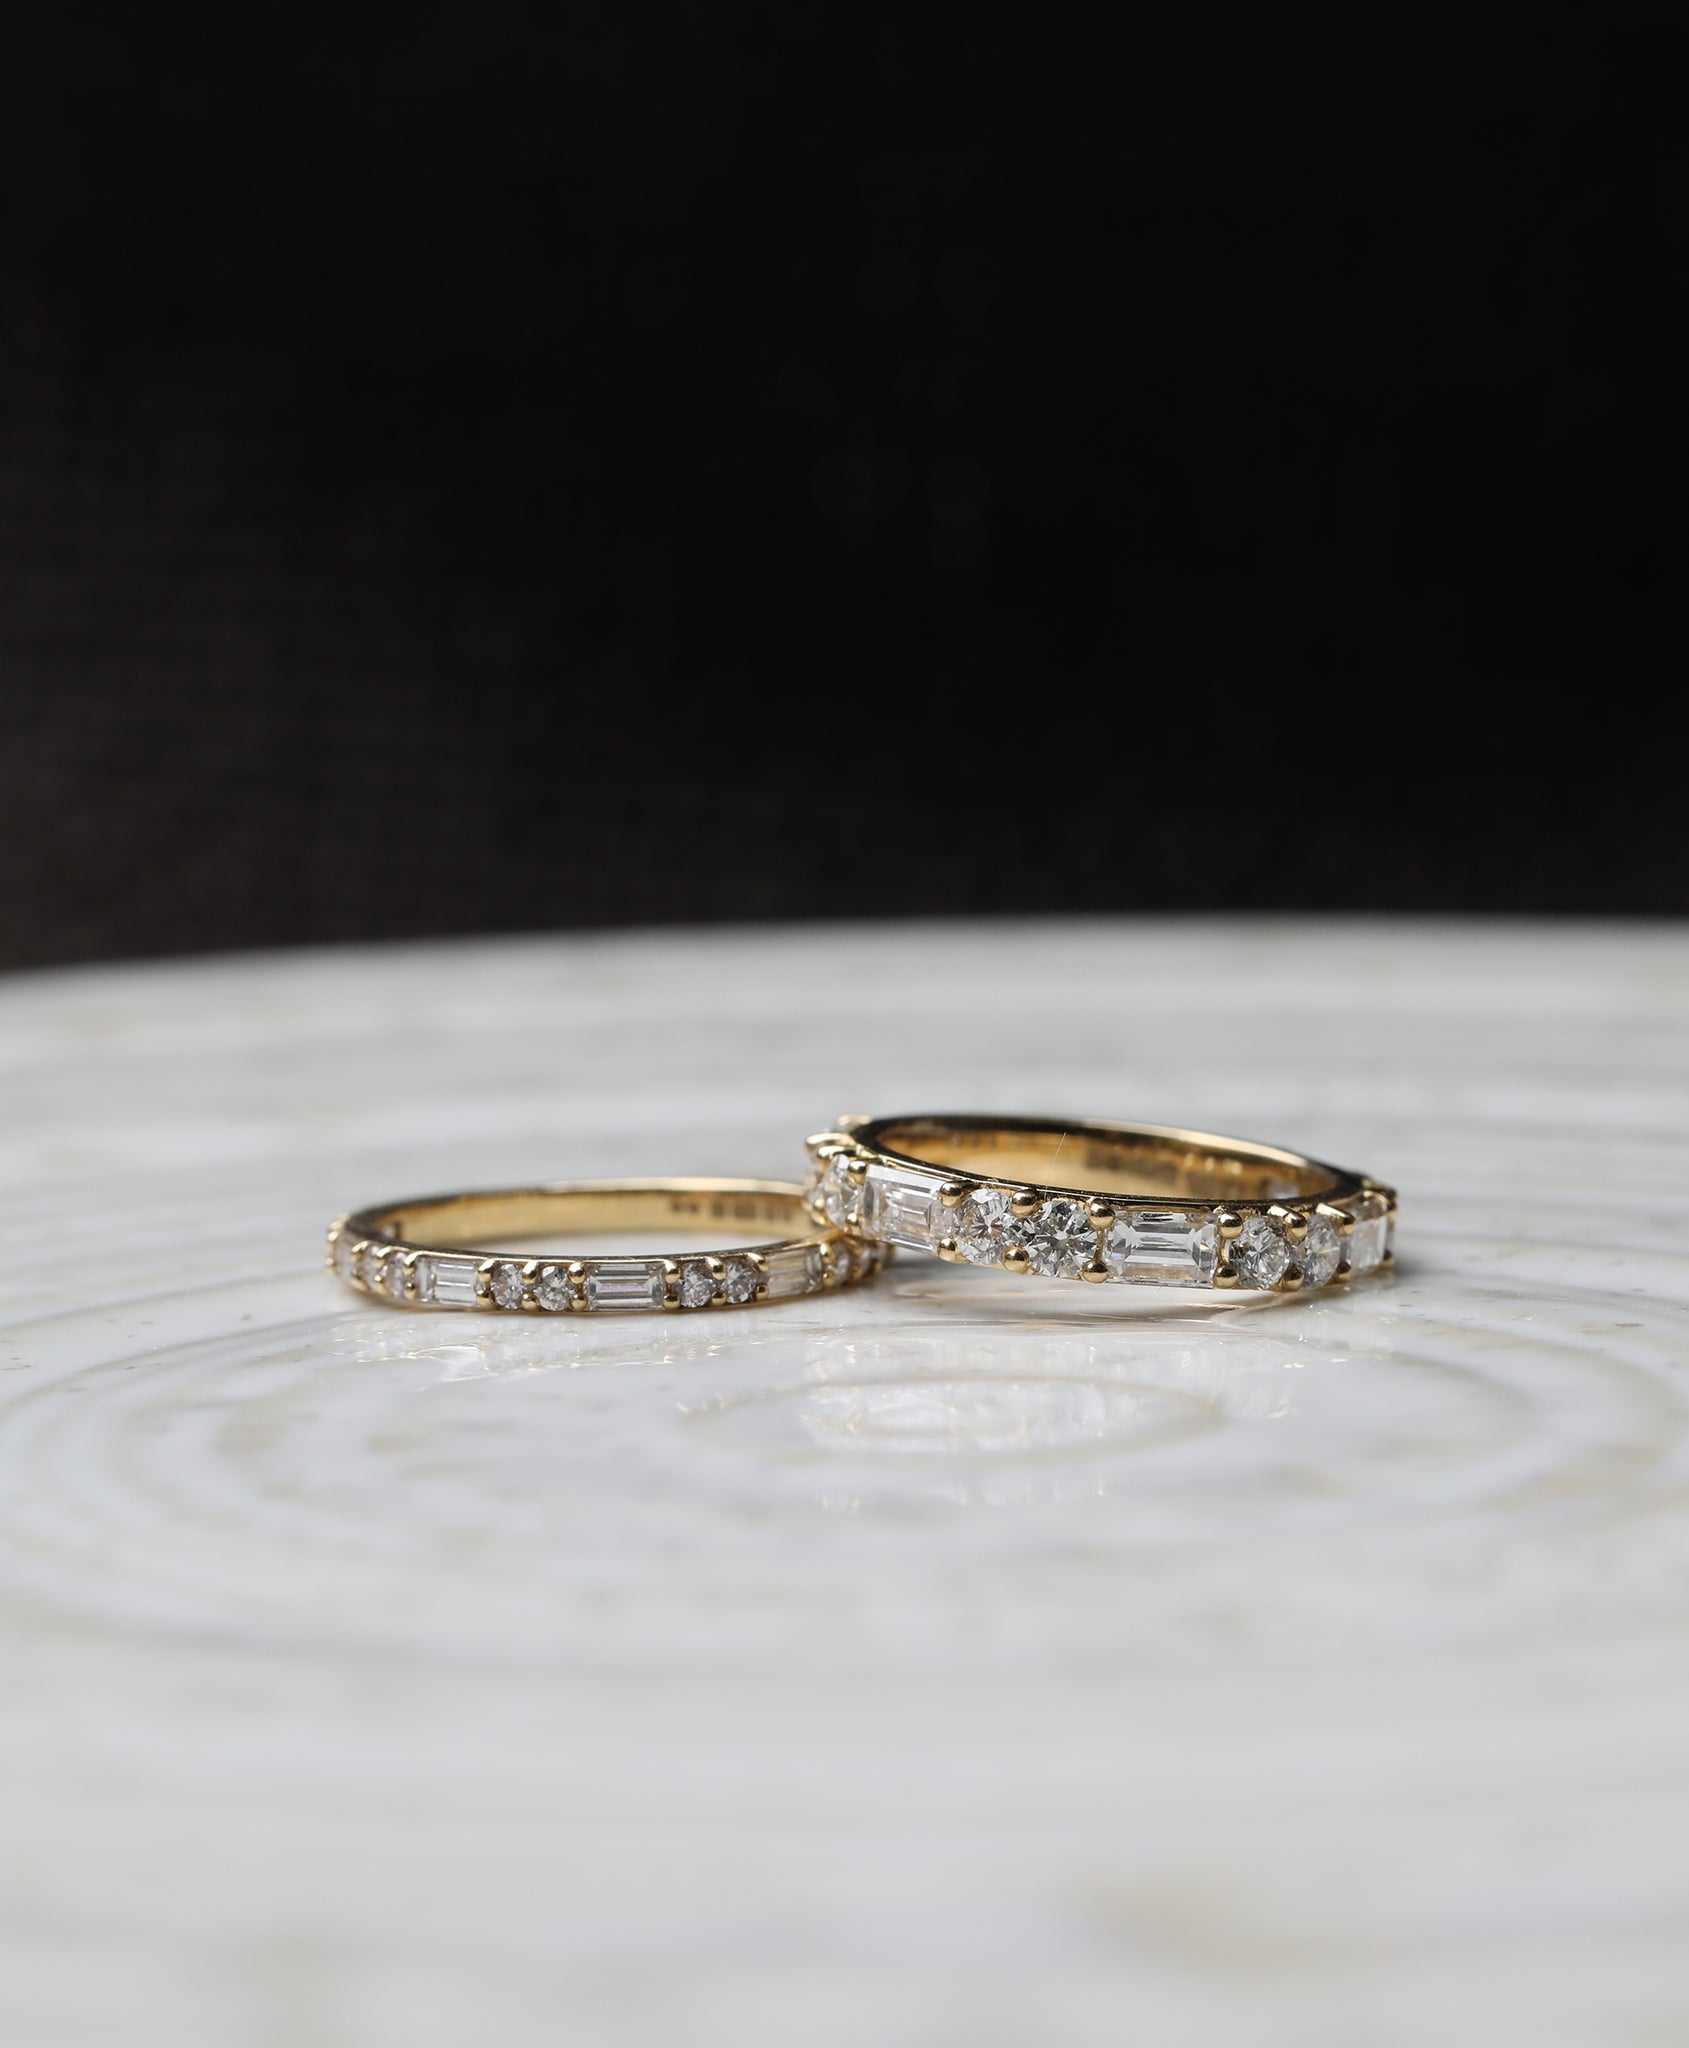 Our classic Baguette and Round Diamond wedding ring transformed into a chunky 3mm Diamond Wedding Ring